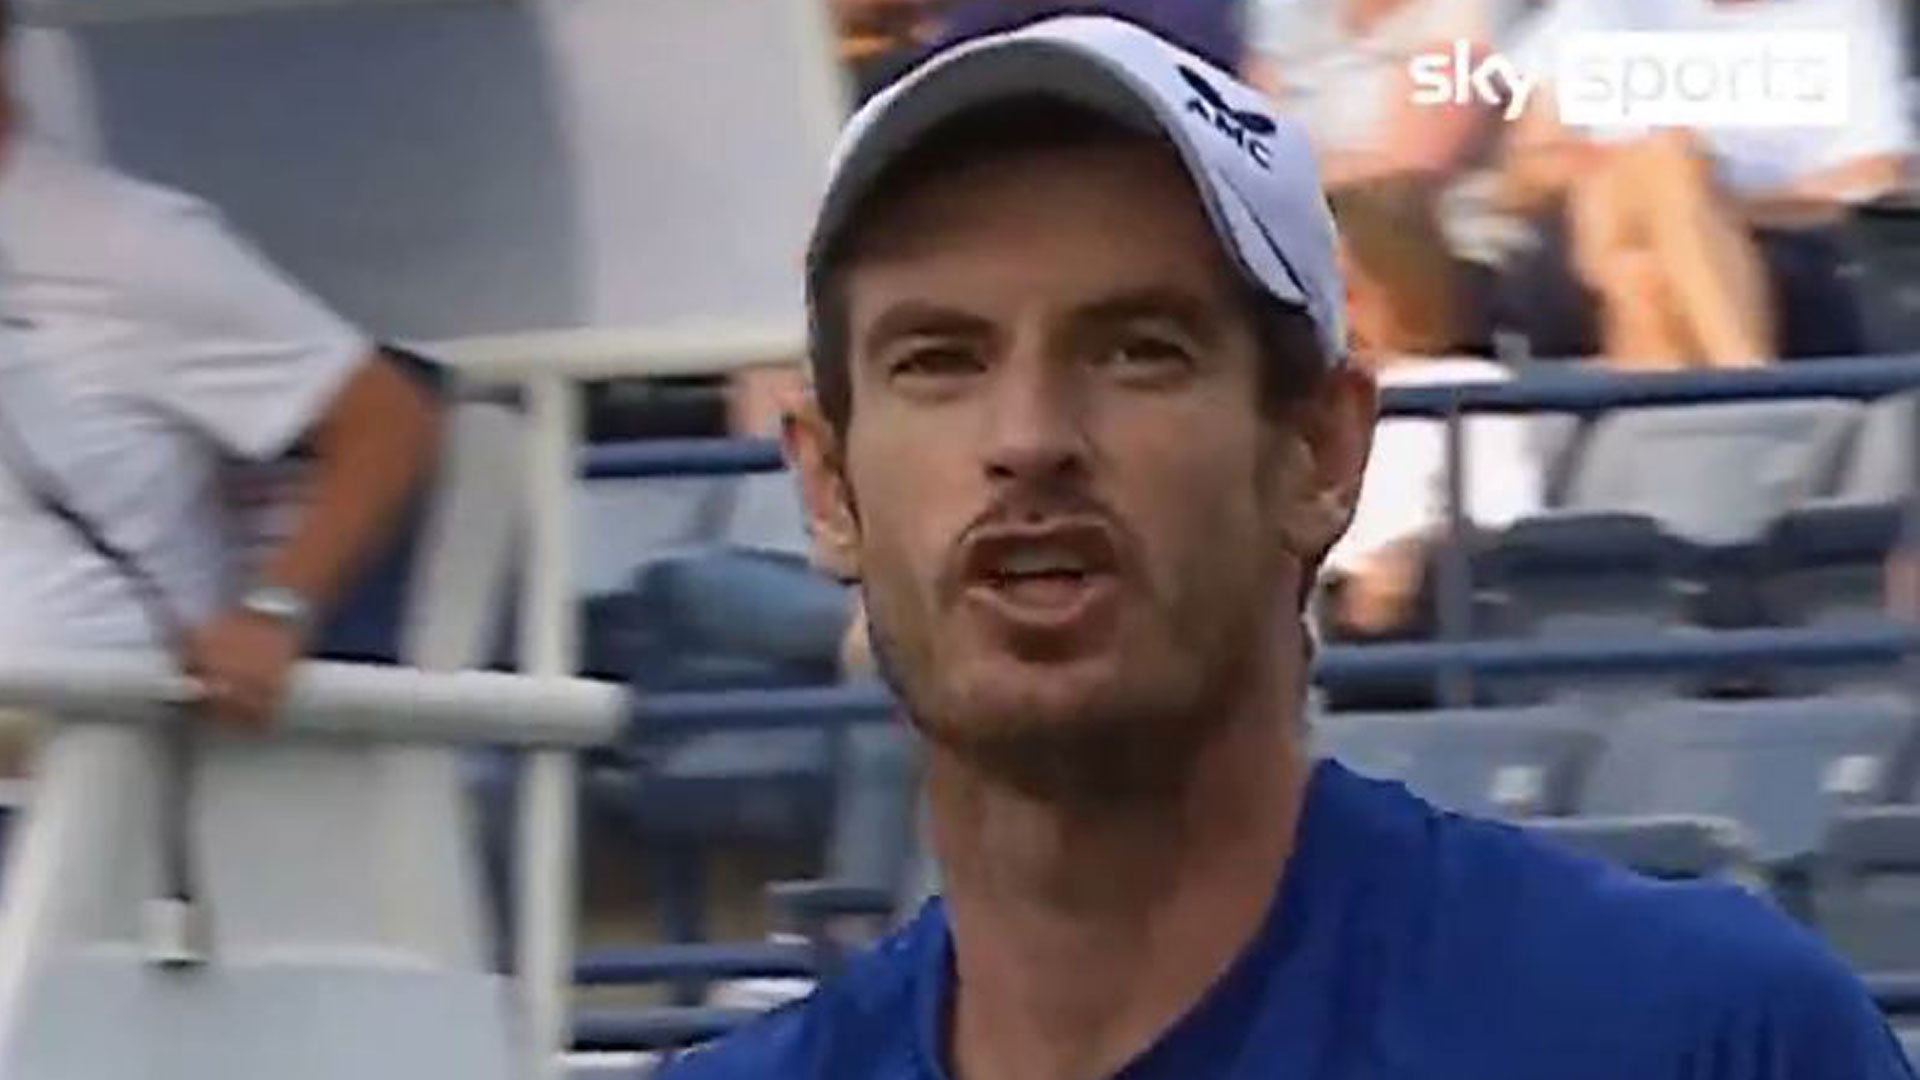 ‘I don’t have a clue’ – Furious Andy Murray warned by umpire after lashing out in latest defeat for Brit tennis star [Video]